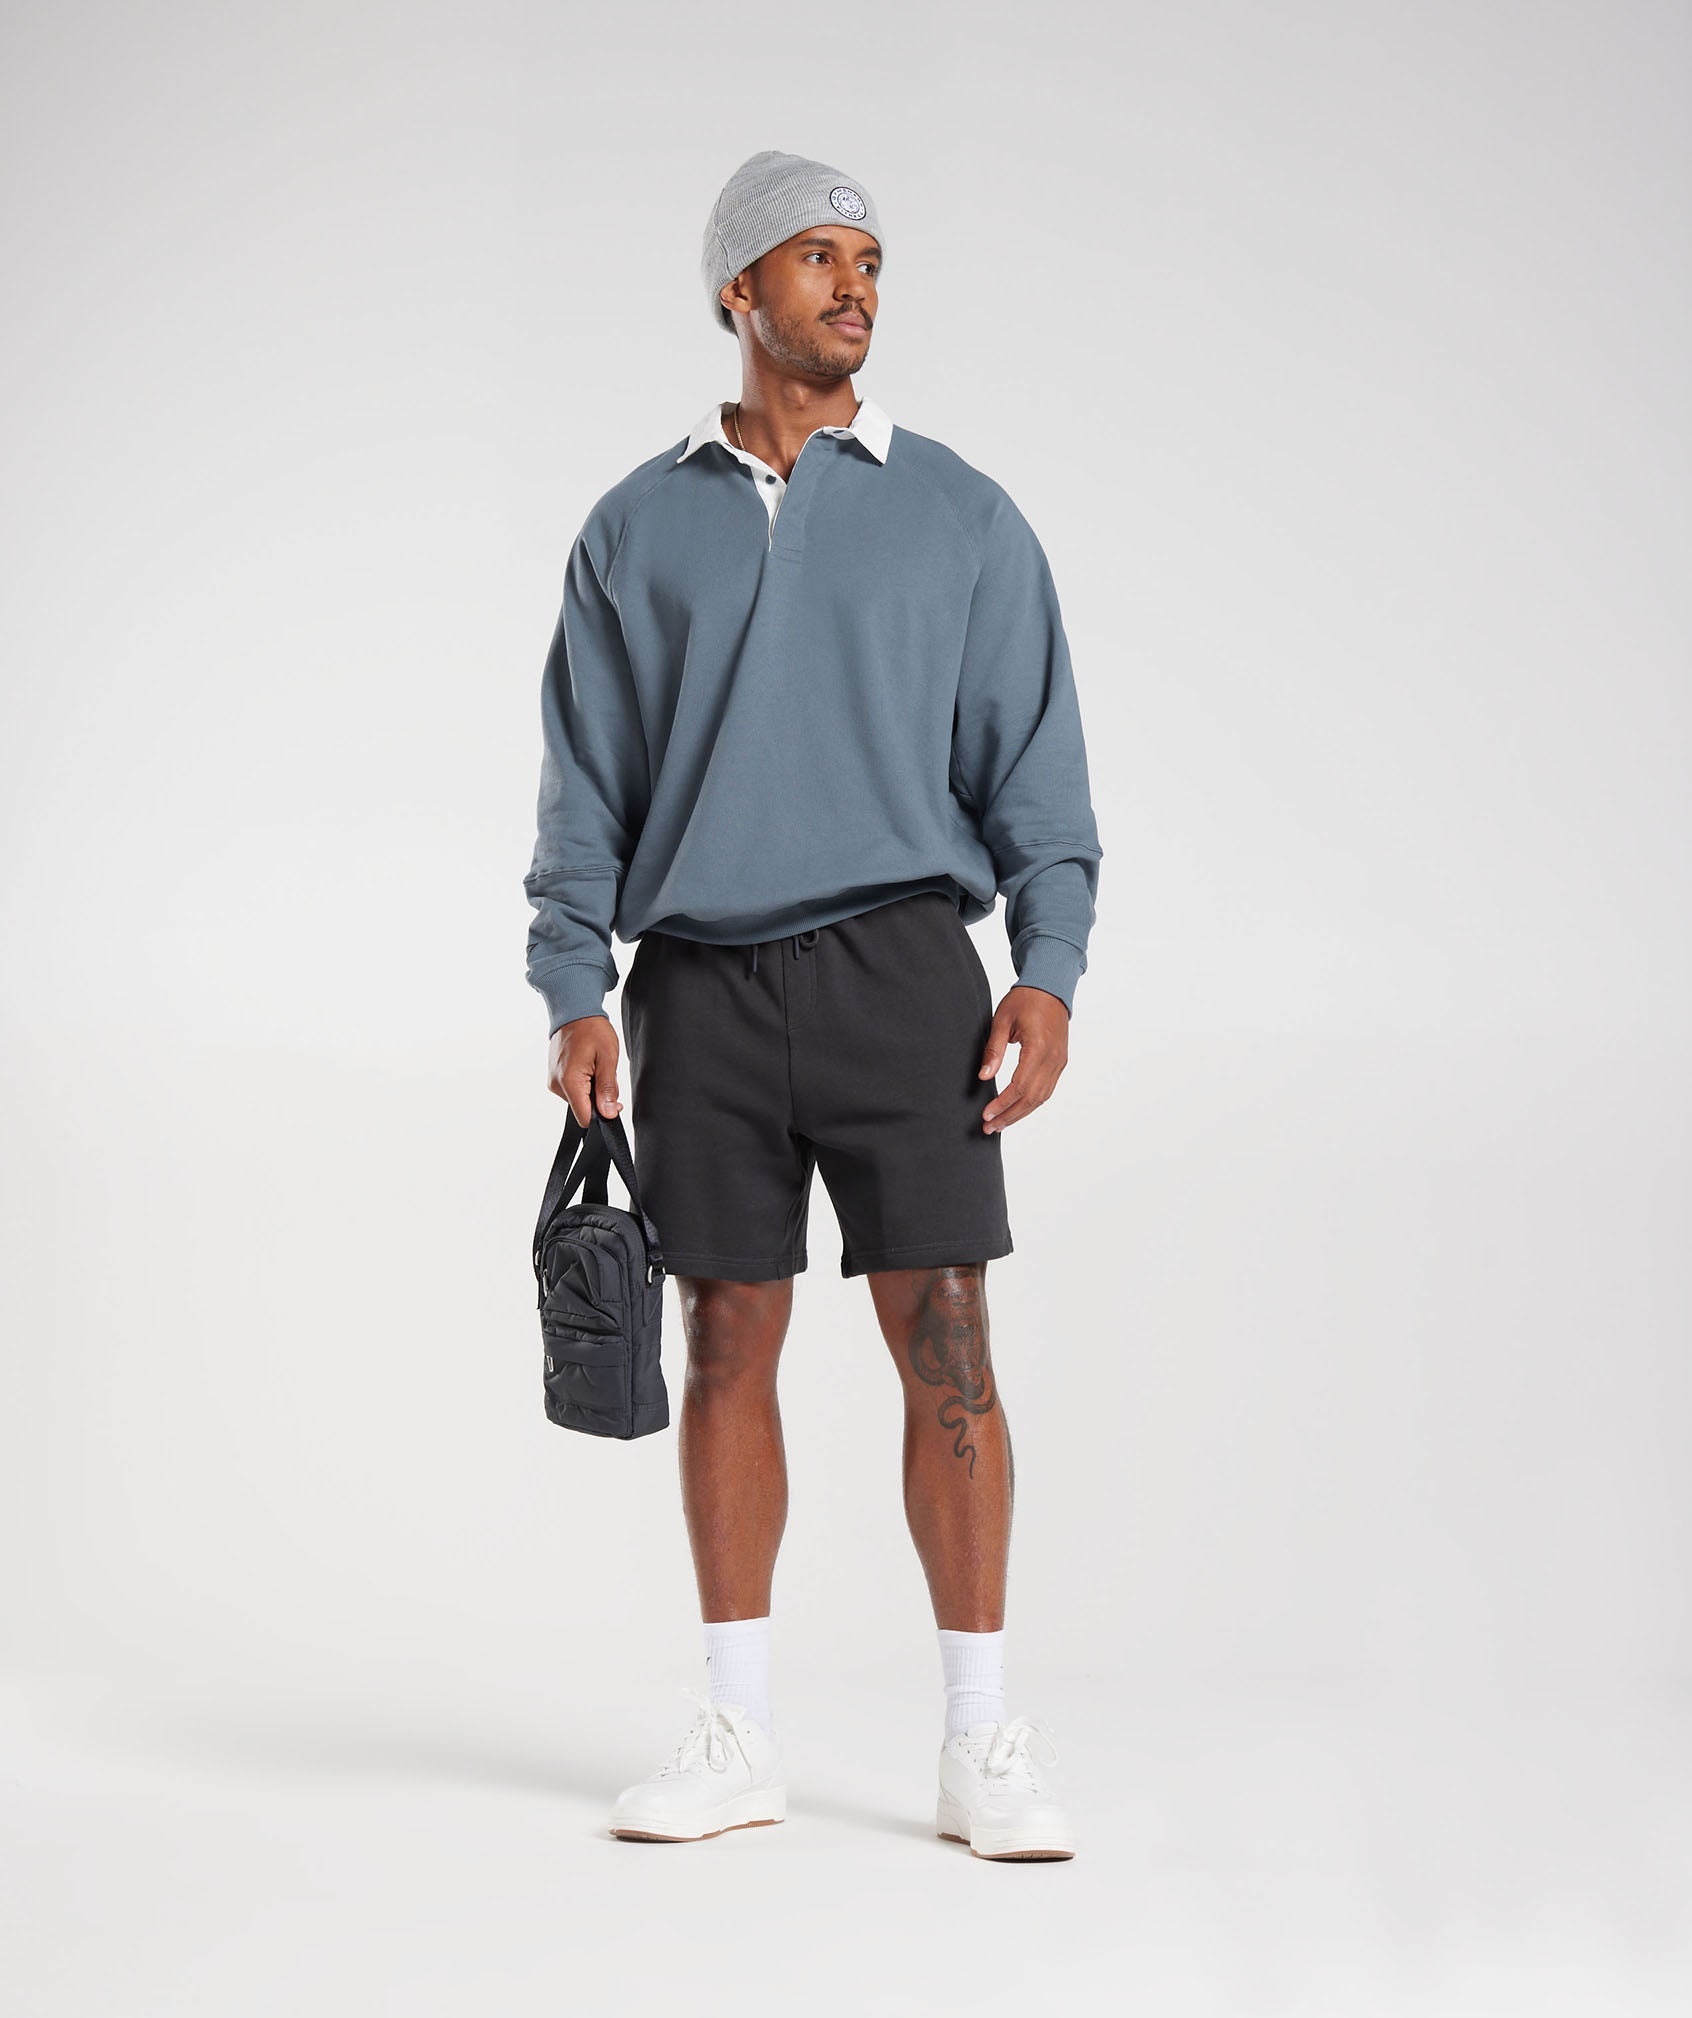 Rest Day Essentials Sweat Polo in Evening Blue - view 4